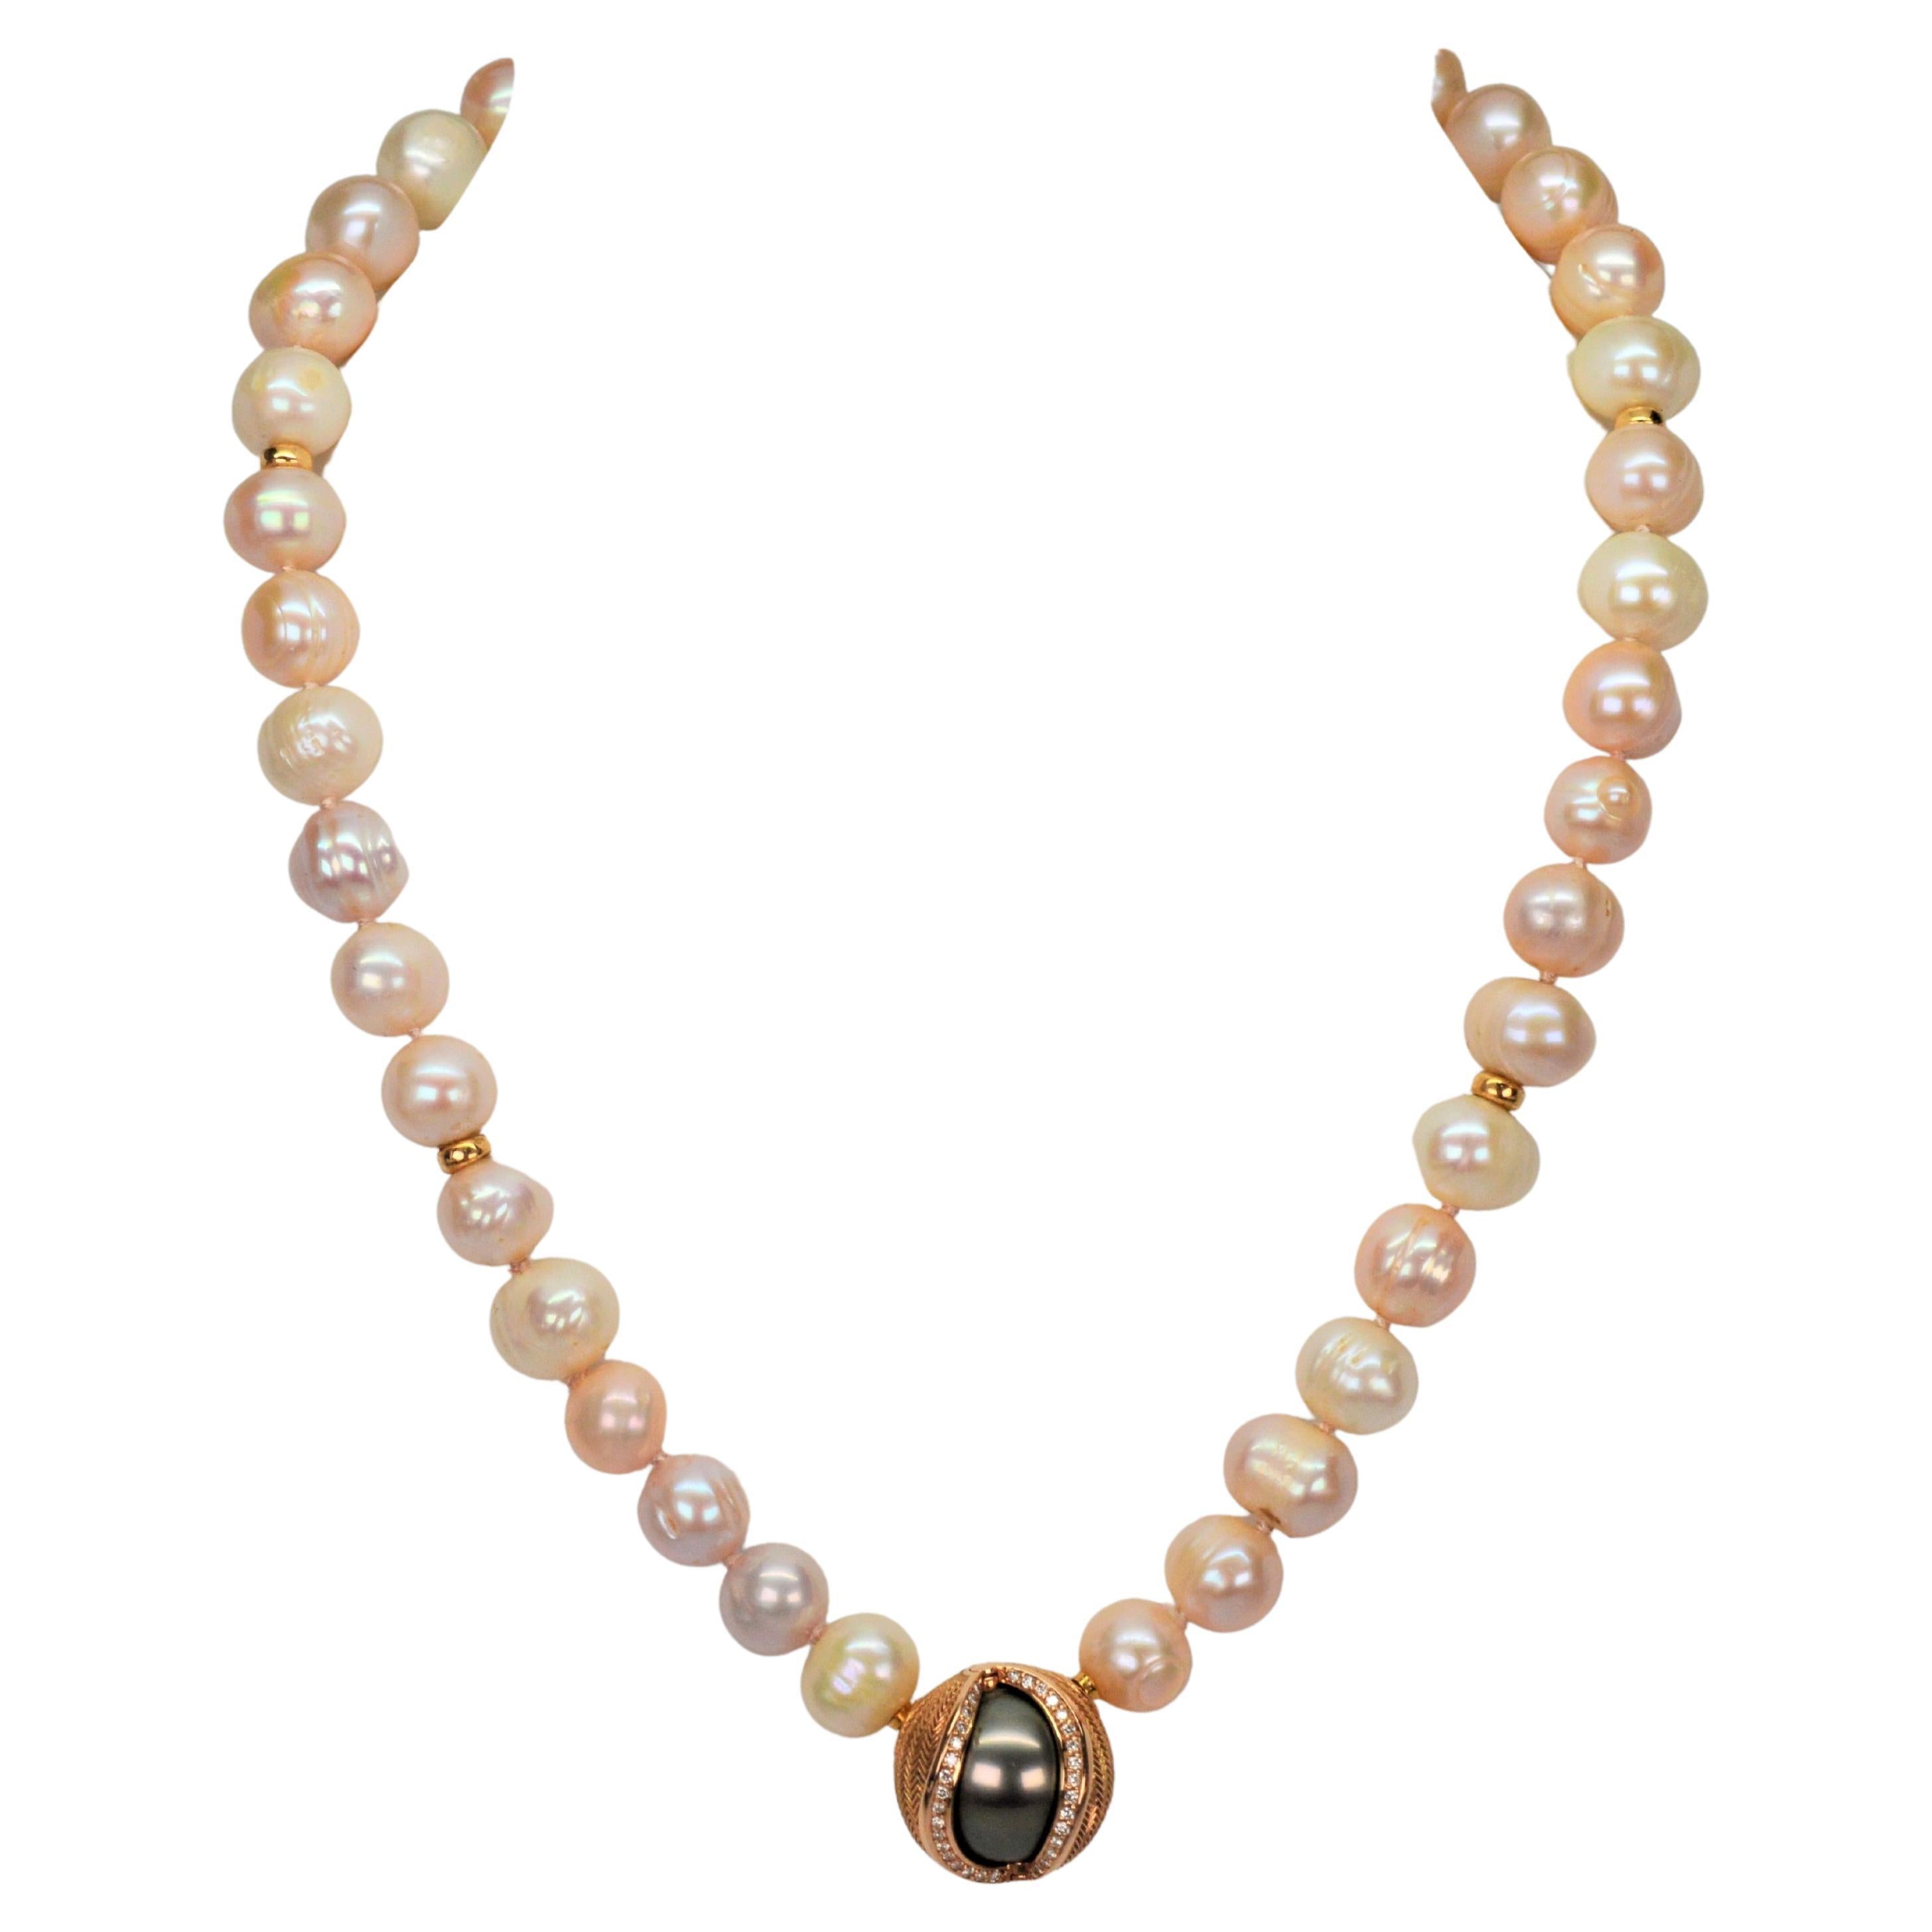 Outstanding design by genius jewelry mechanic Jorg Heinz. This lovely 15 inch pastel-hue pearl strand features his proprietary unique mystery sphere clasp, inter-changible by the three position click of the 18 karat gold shell which gives the option